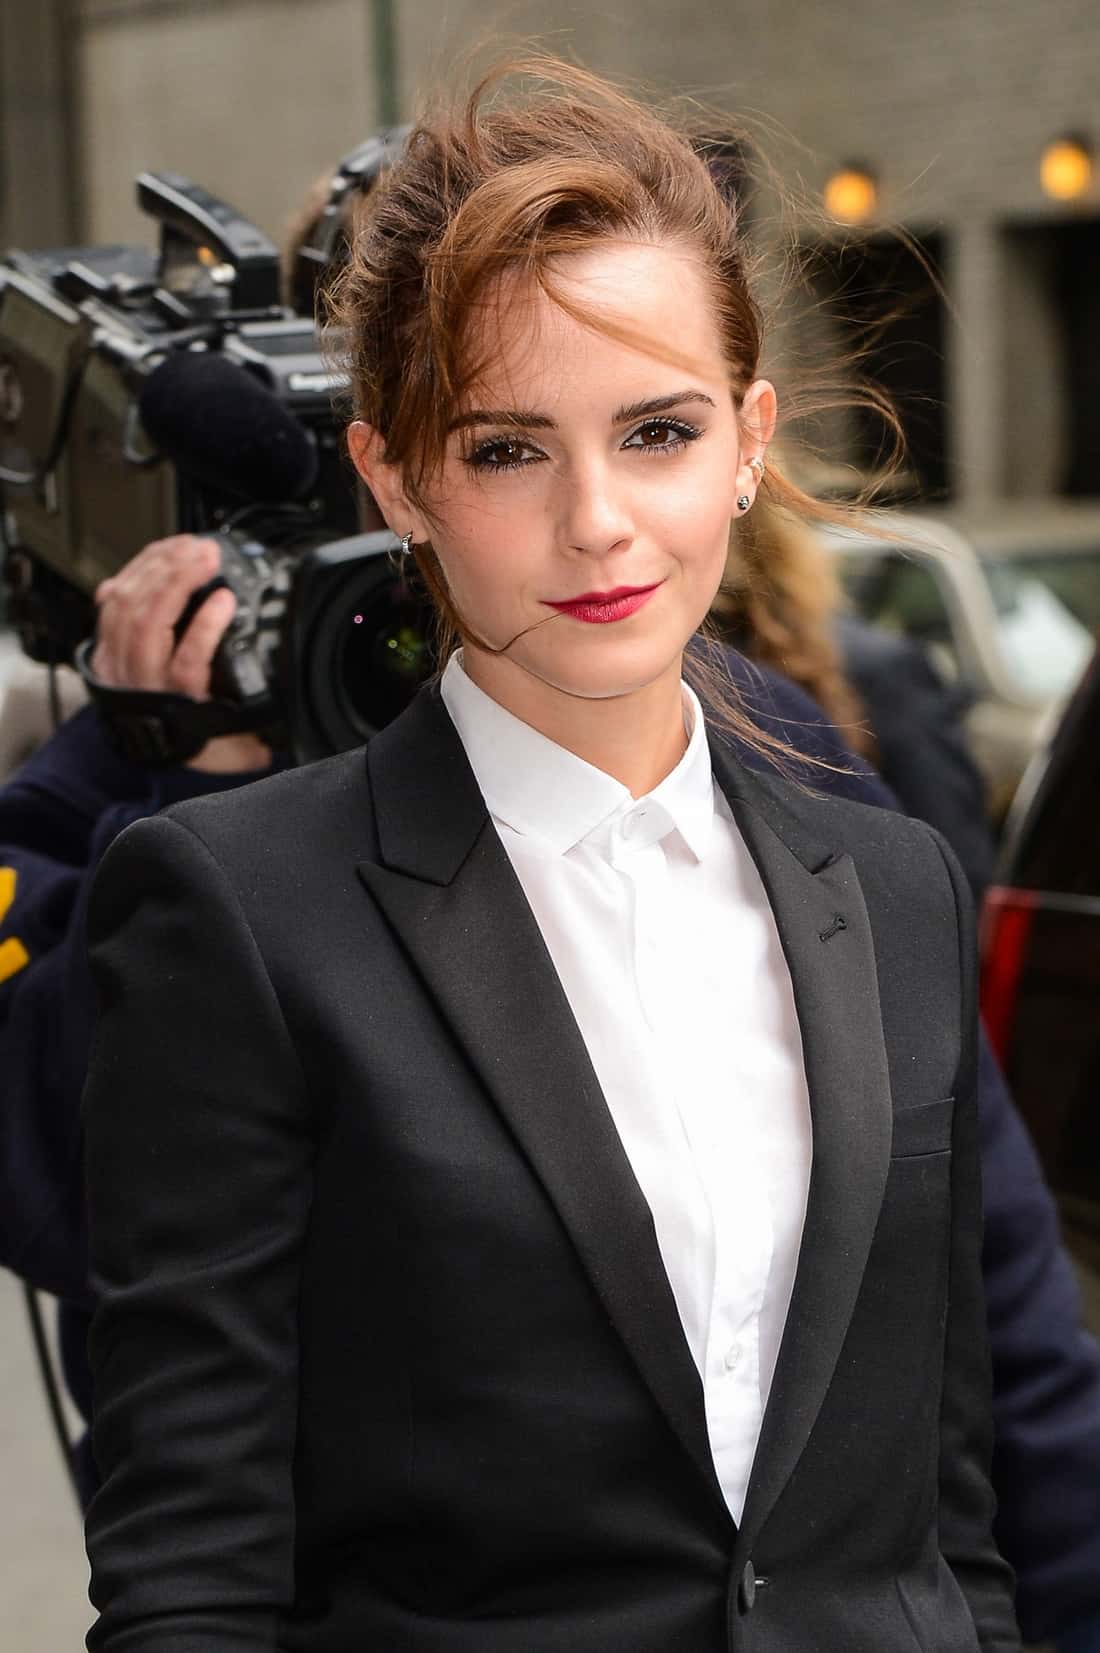 Emma Watson Looked Incredible Stylish as She Posed in Midtown Manhattan